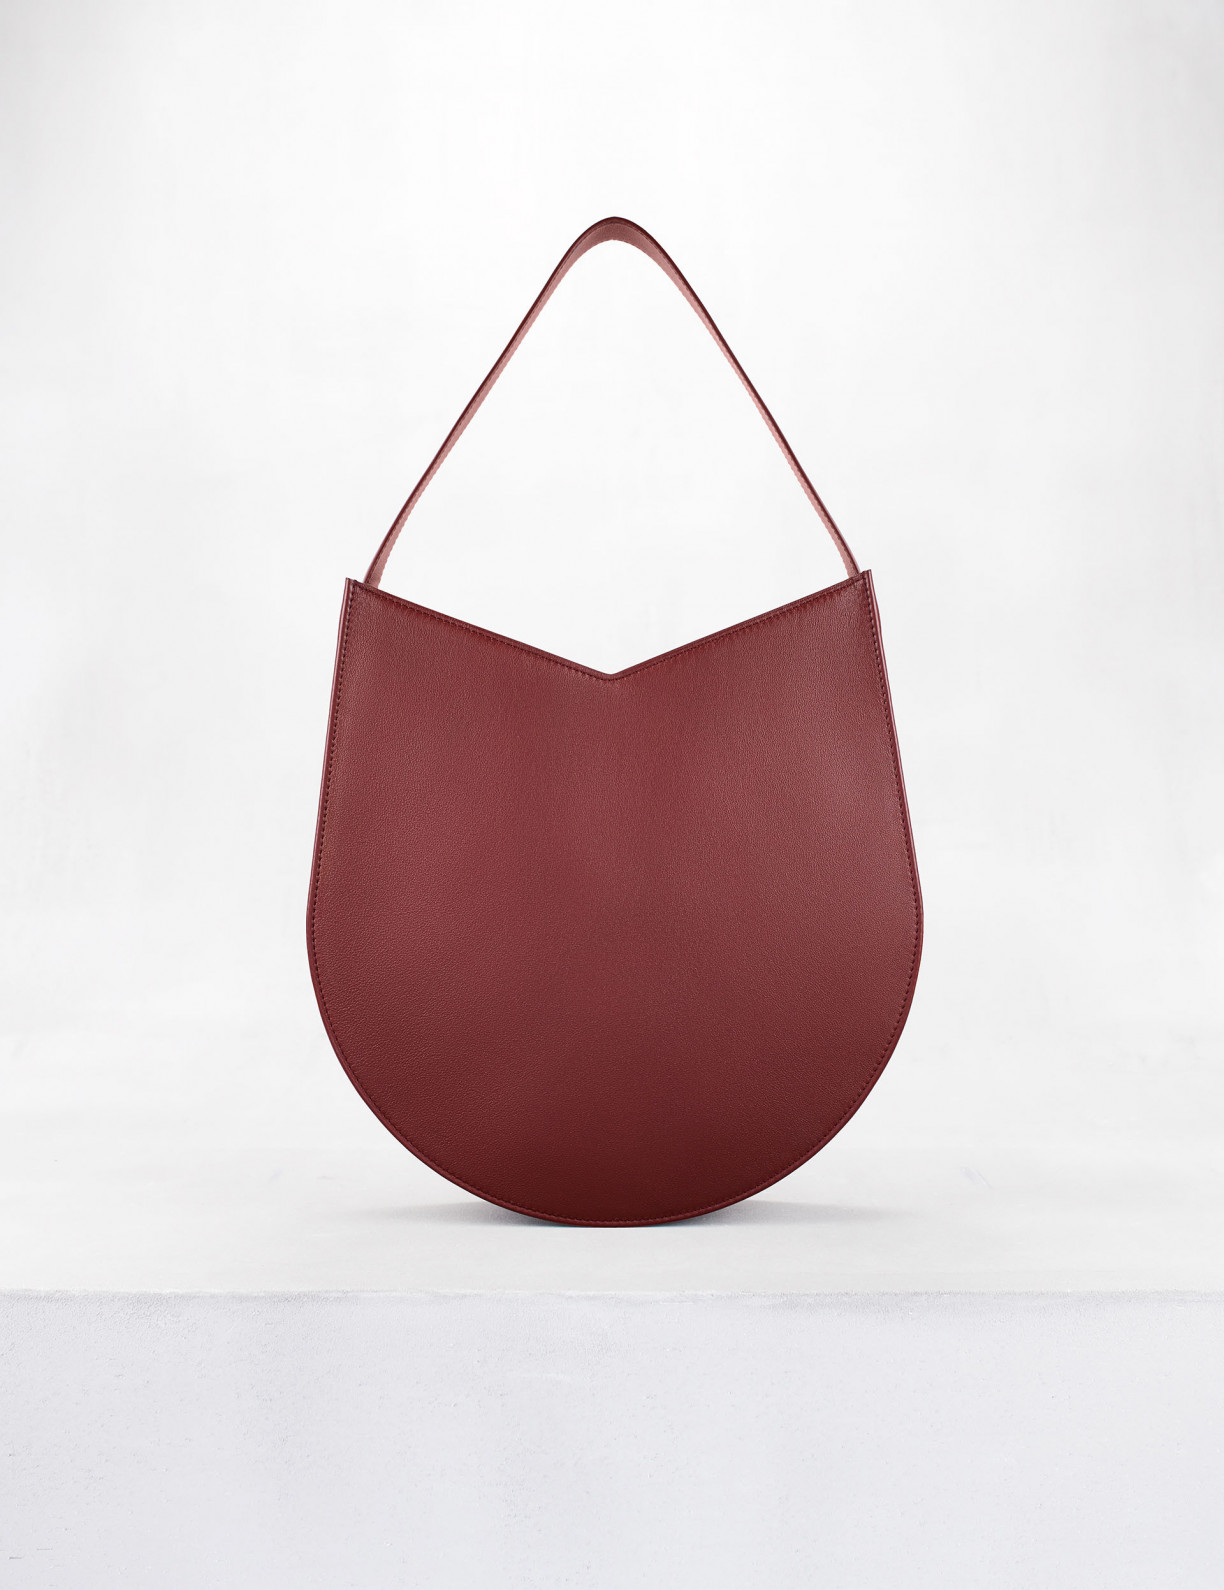 Camille Fournet, fine leather goods